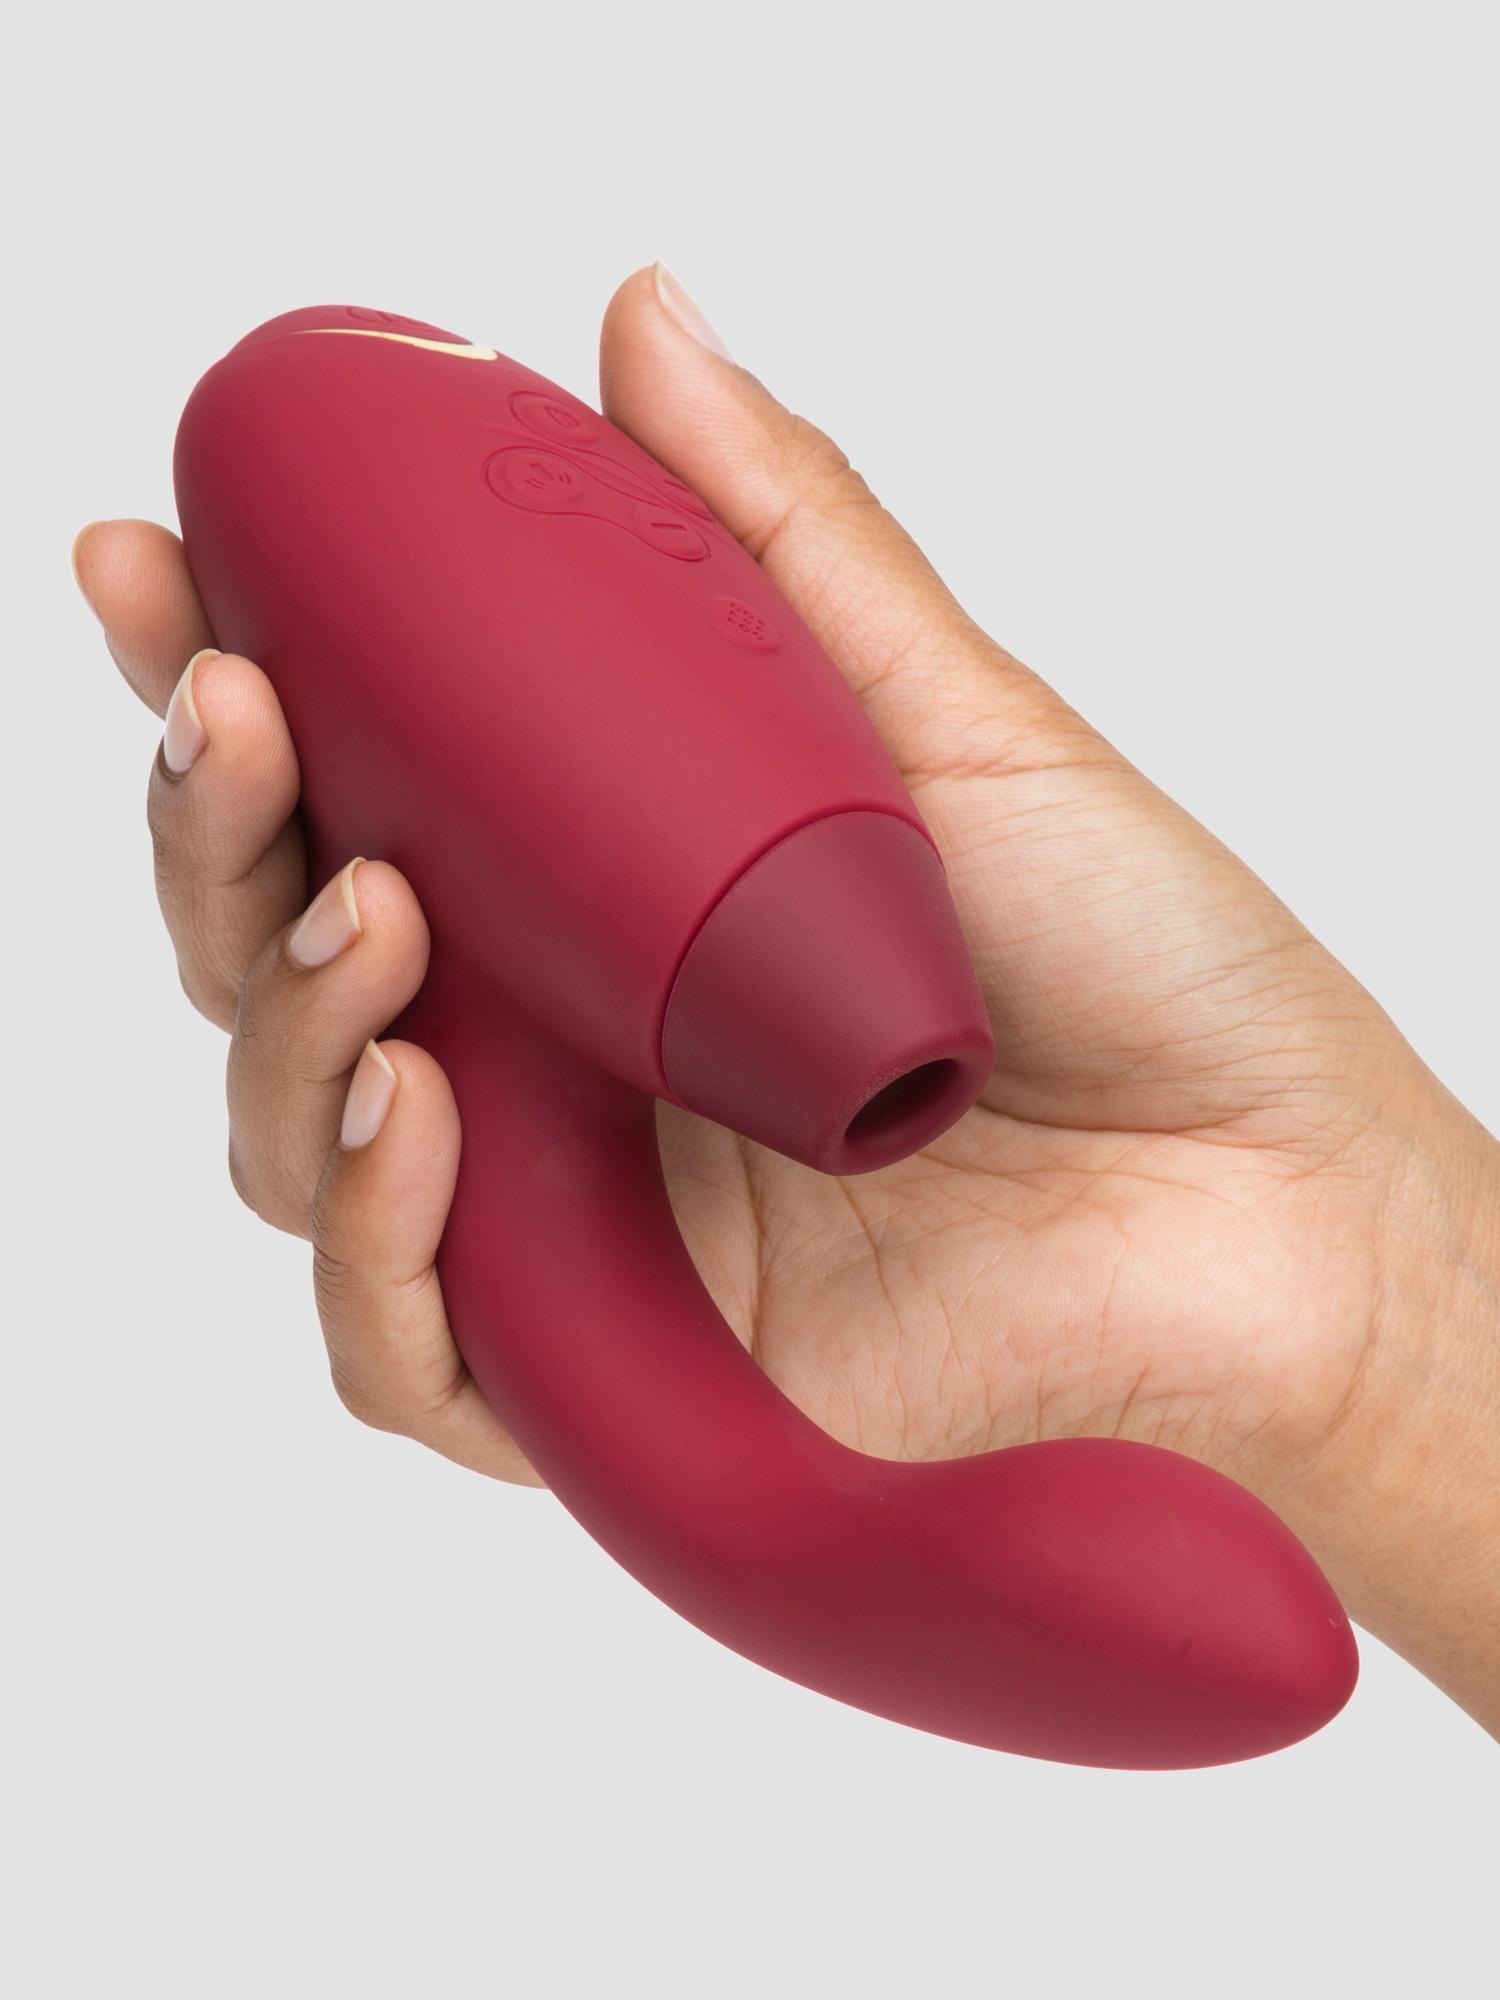 14 Sex Toys Designed For Some Intense Clitoral Stimulation HuffPost Life